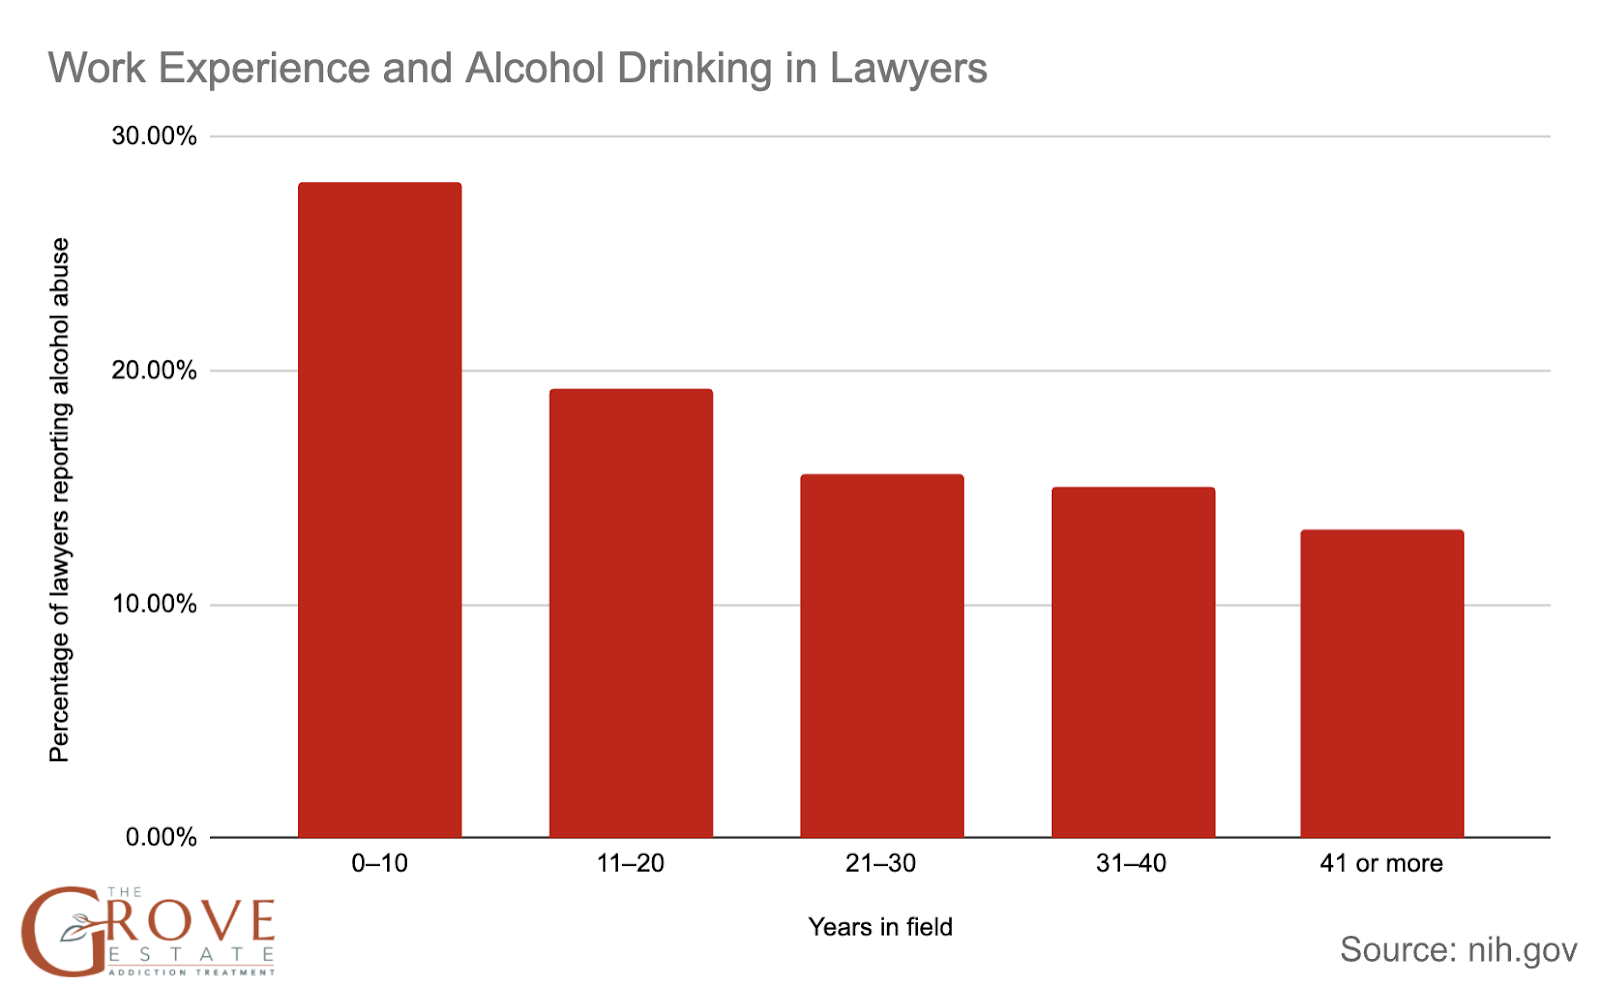 Work Experience and Alcohol Drinking in Lawyers